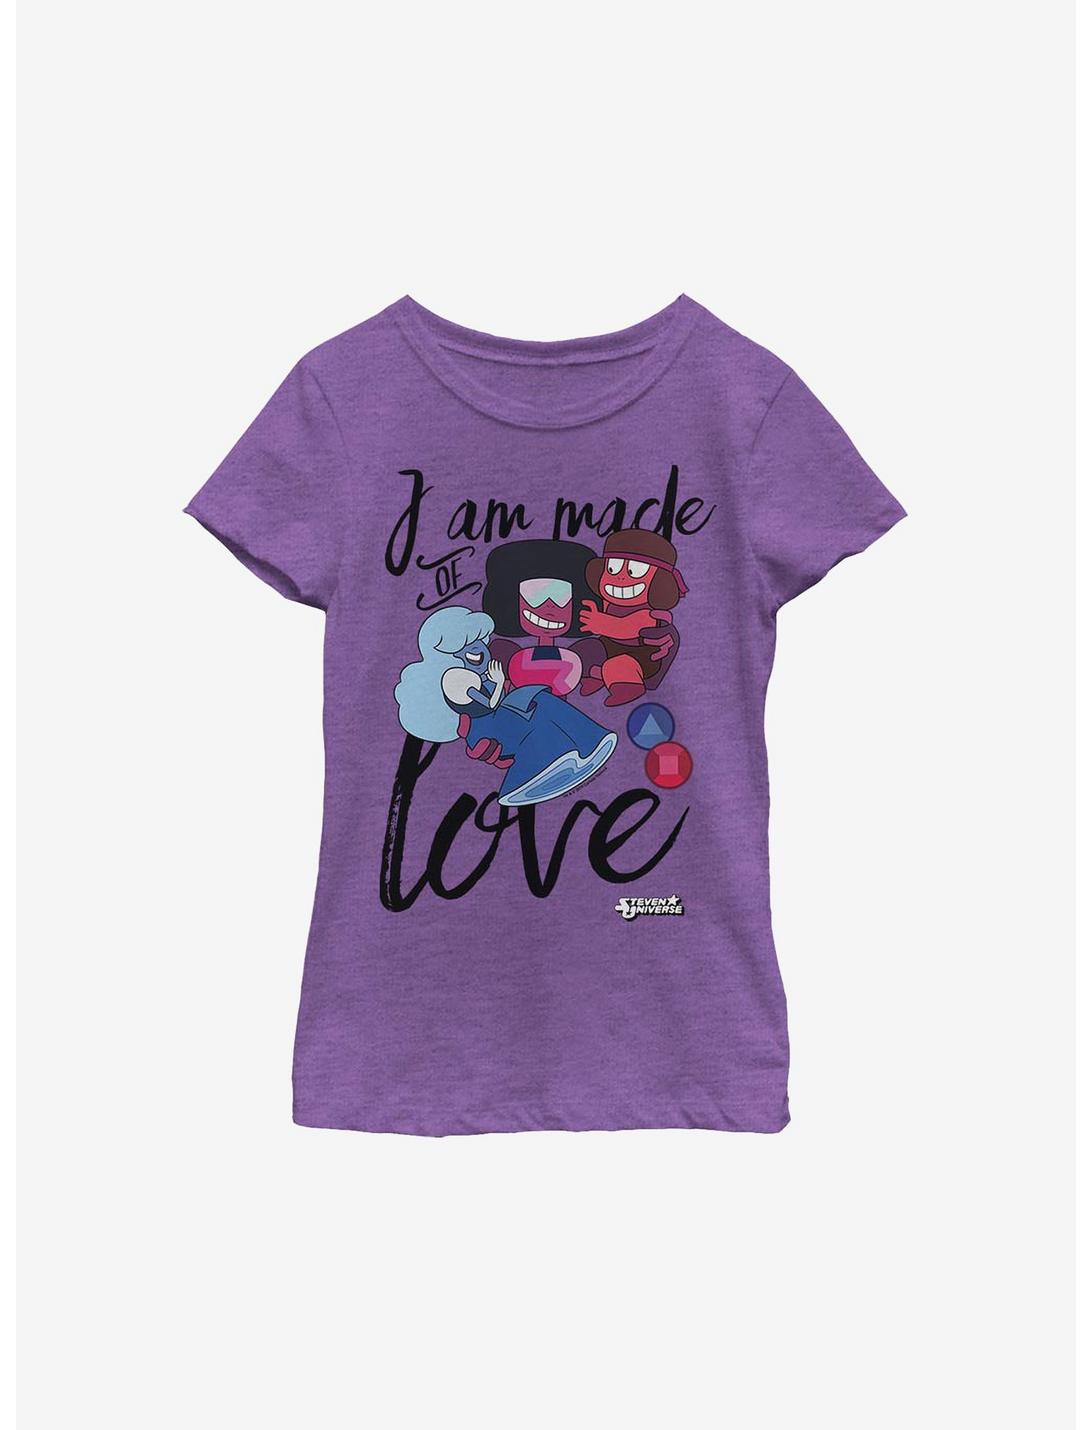 Steven Universe I Am Made Of Love Youth Girls T-Shirt, PURPLE BERRY, hi-res